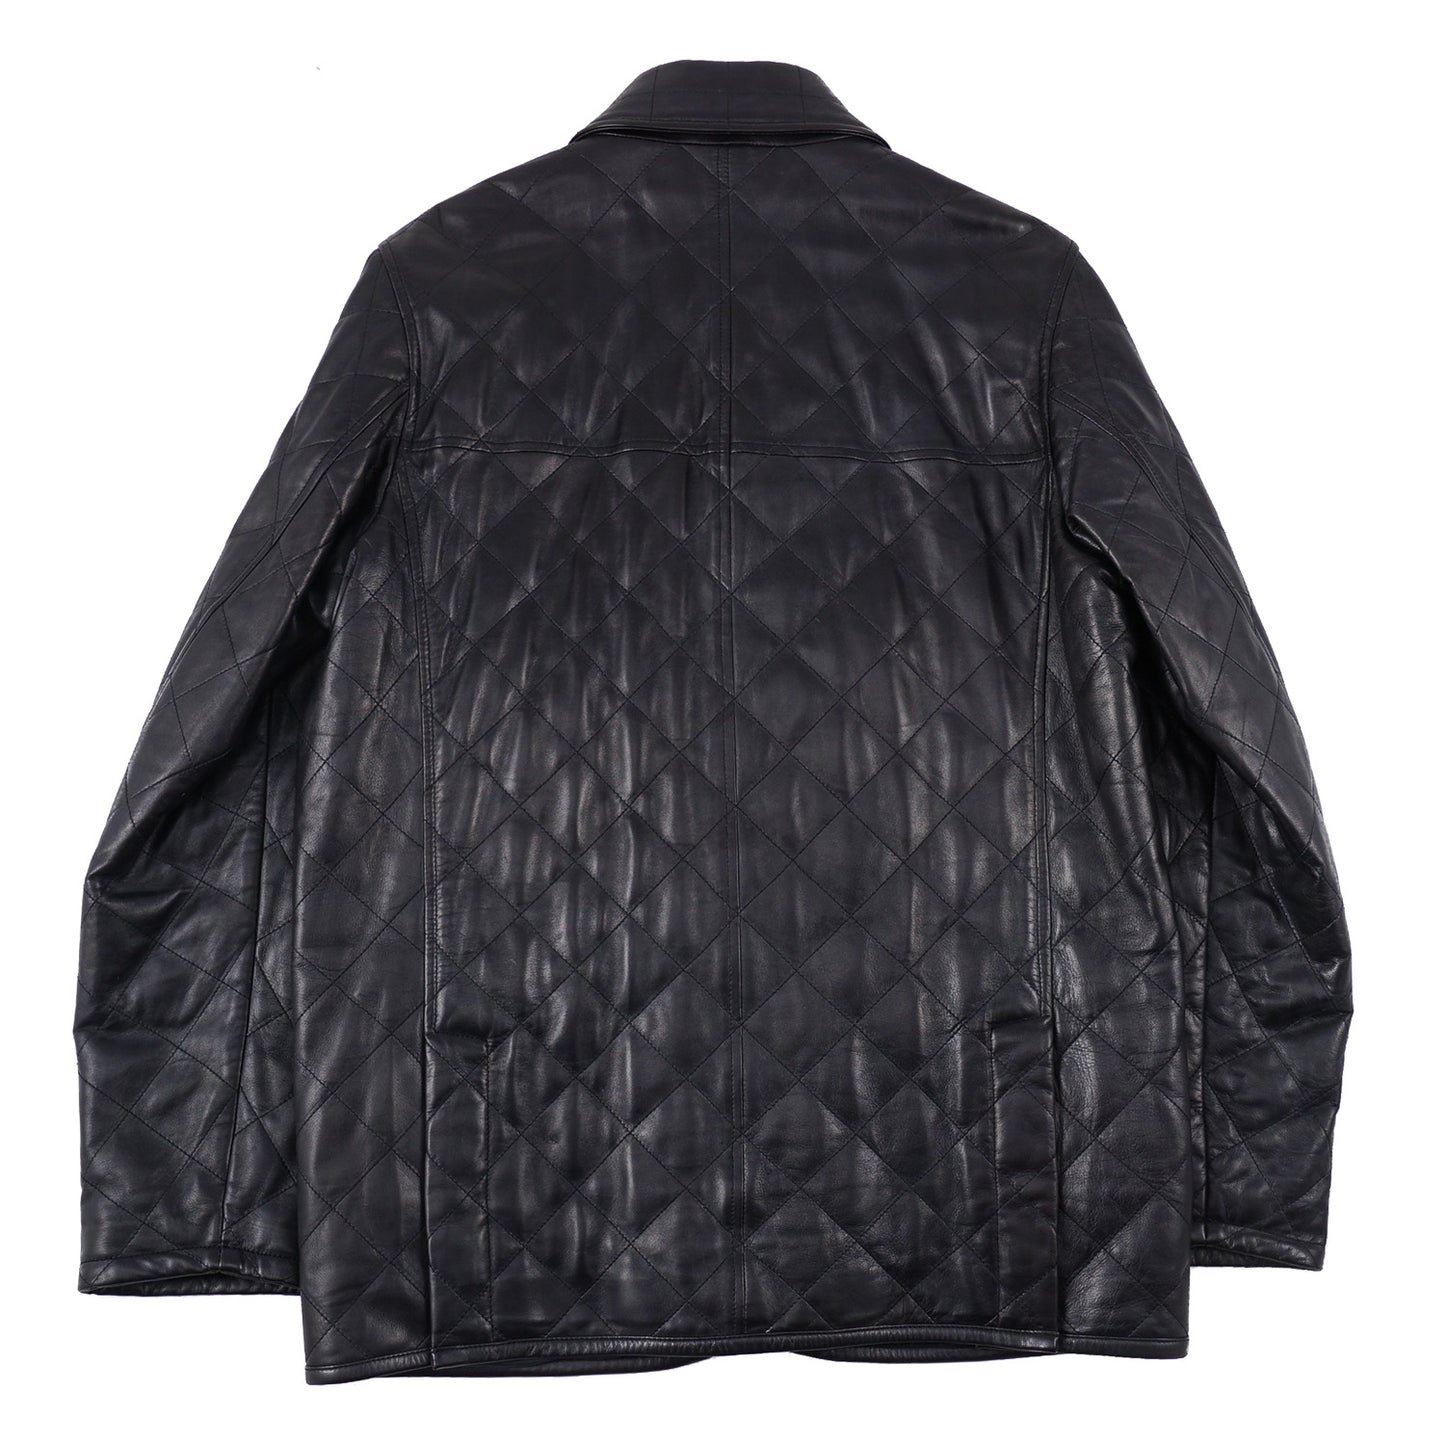 Isaia Diamond Quilted Leather Jacket in Black - Top Shelf Apparel